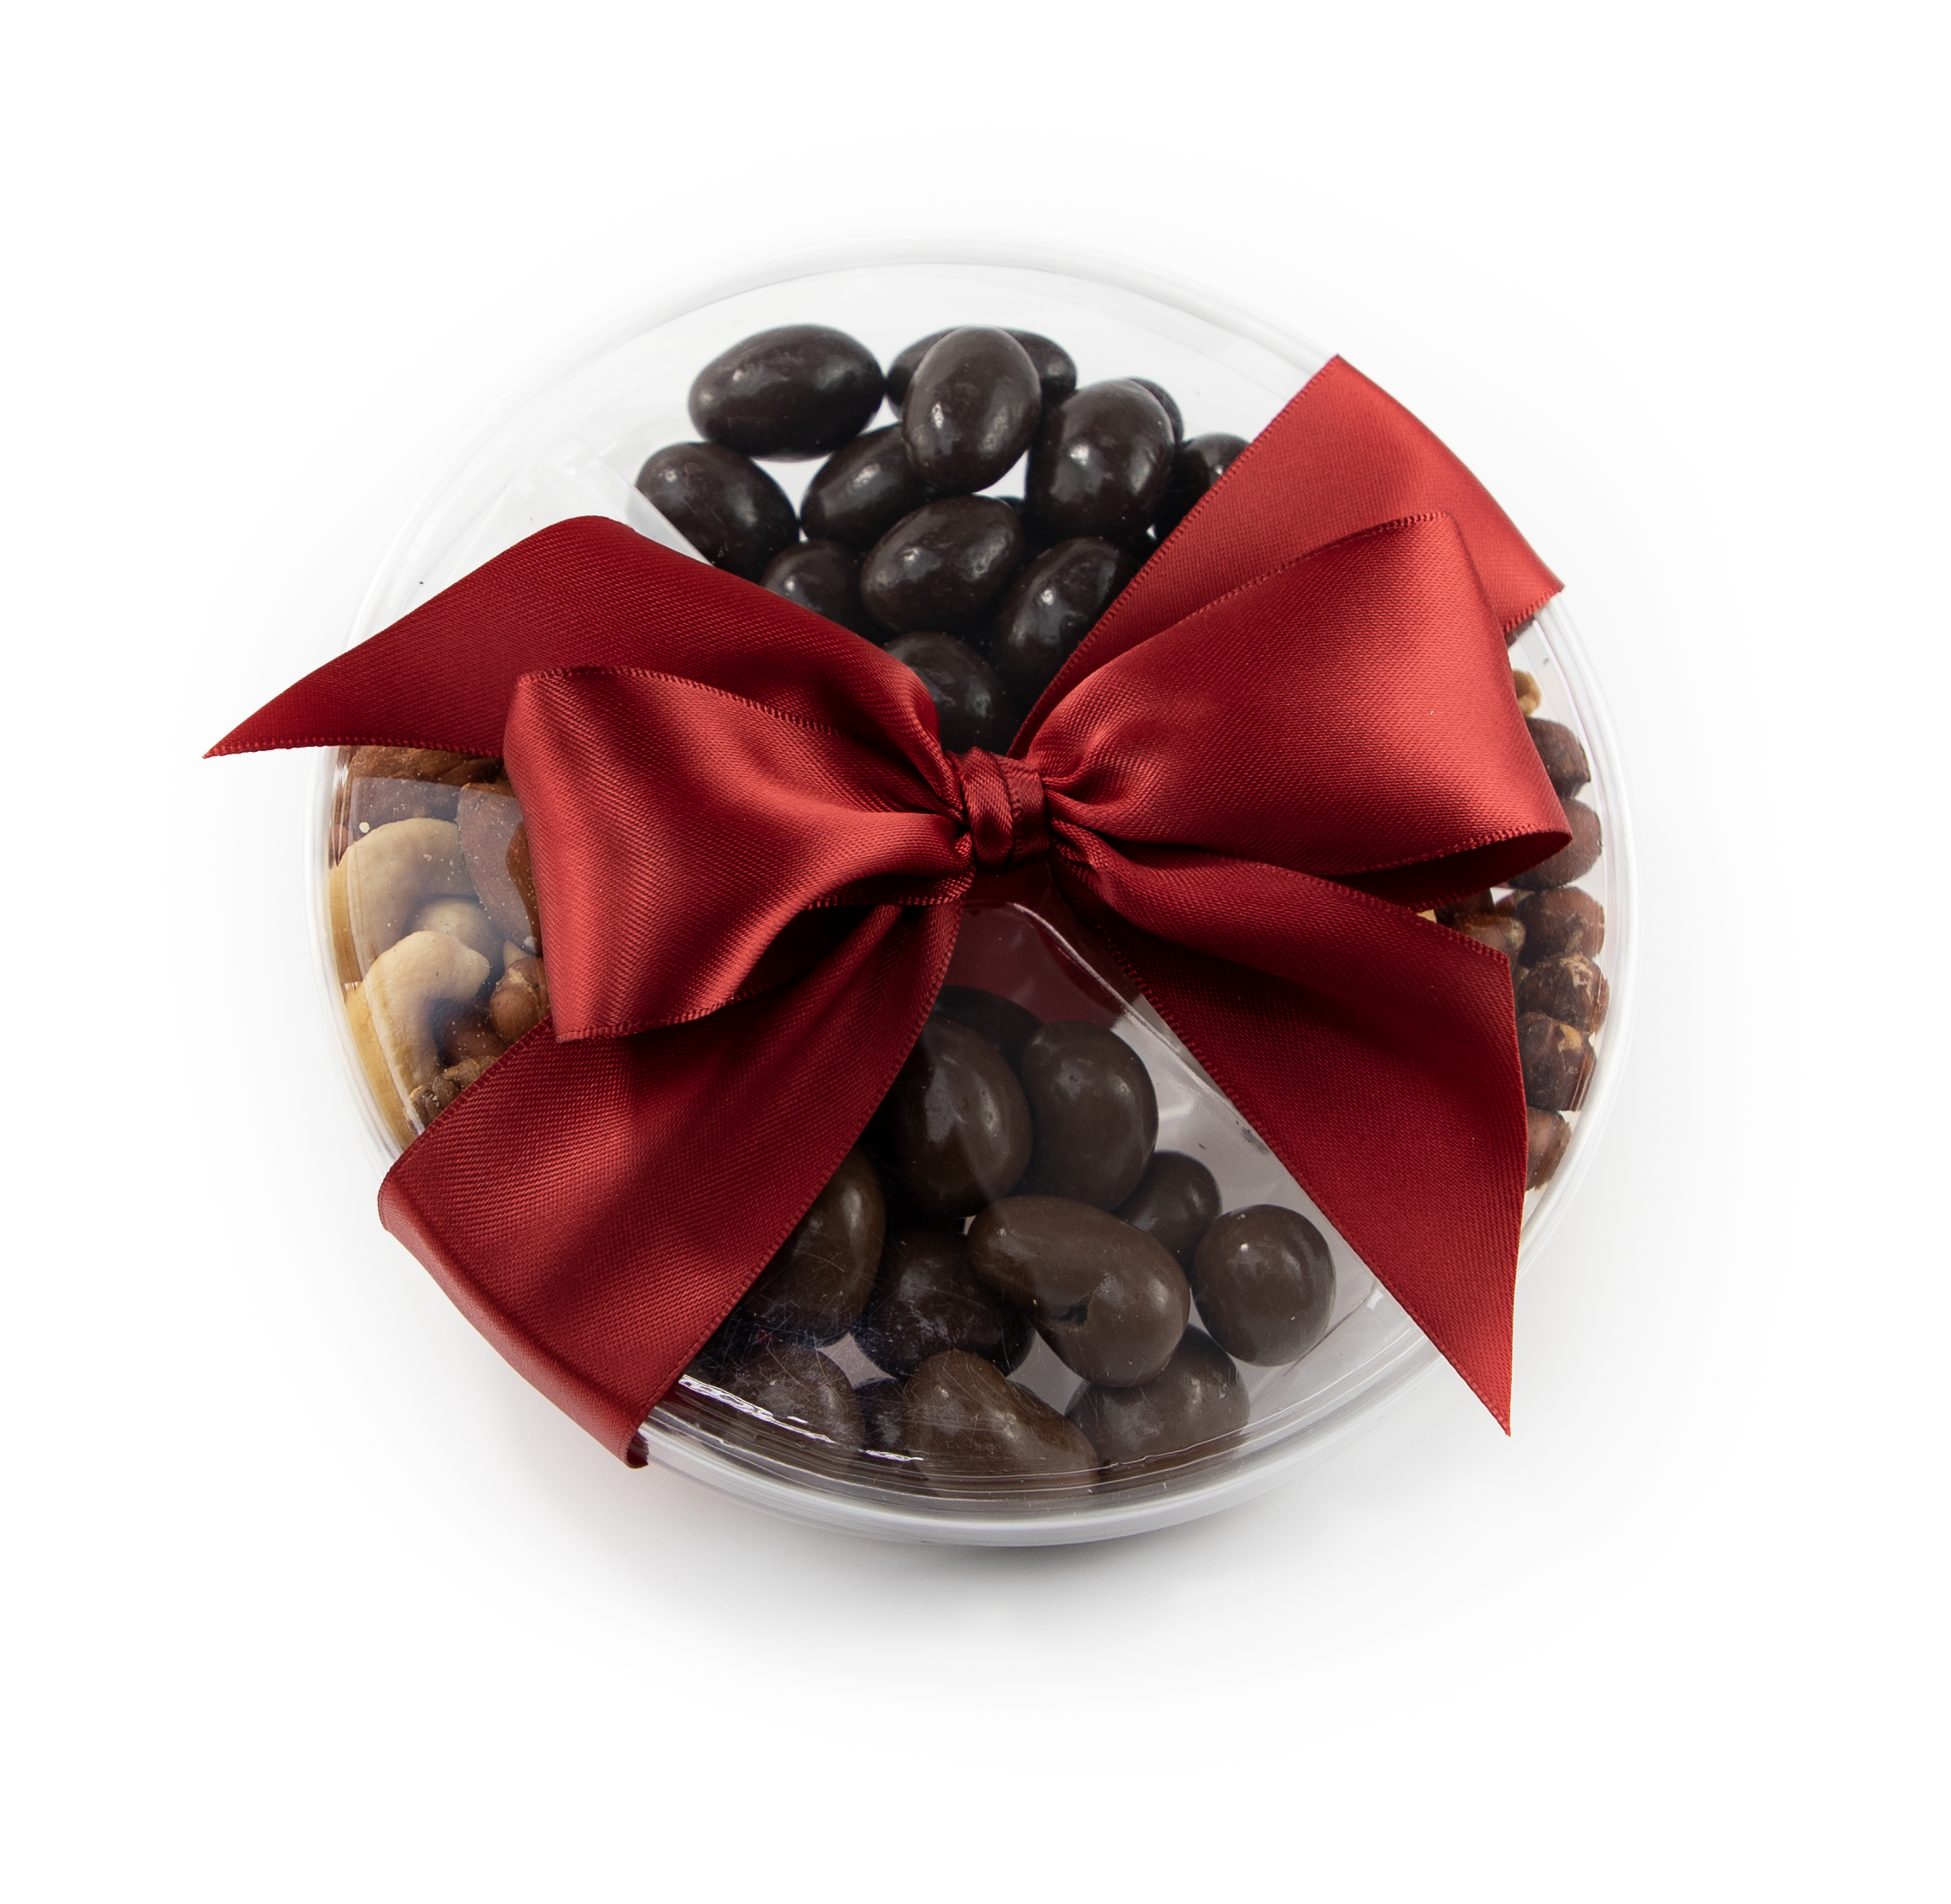 Chocolate Lover's Delight Sampler Holiday Gift Pack | Newsoms Peanut Shop